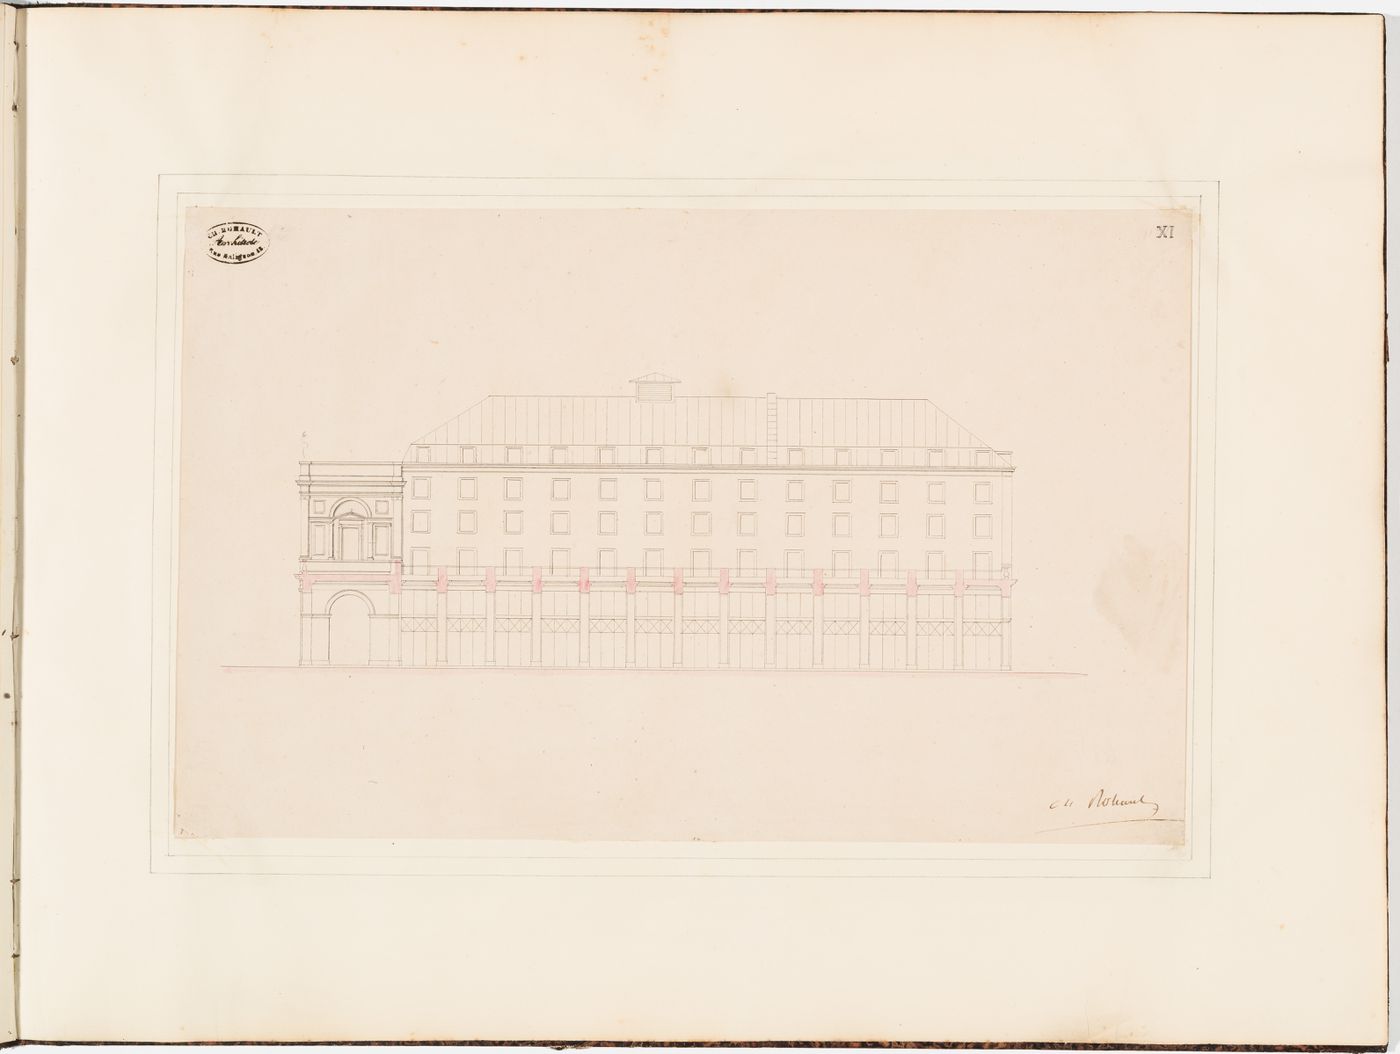 Sectional side elevation for the Théâtre Royal Italien, showing the interior of the shopping arcade